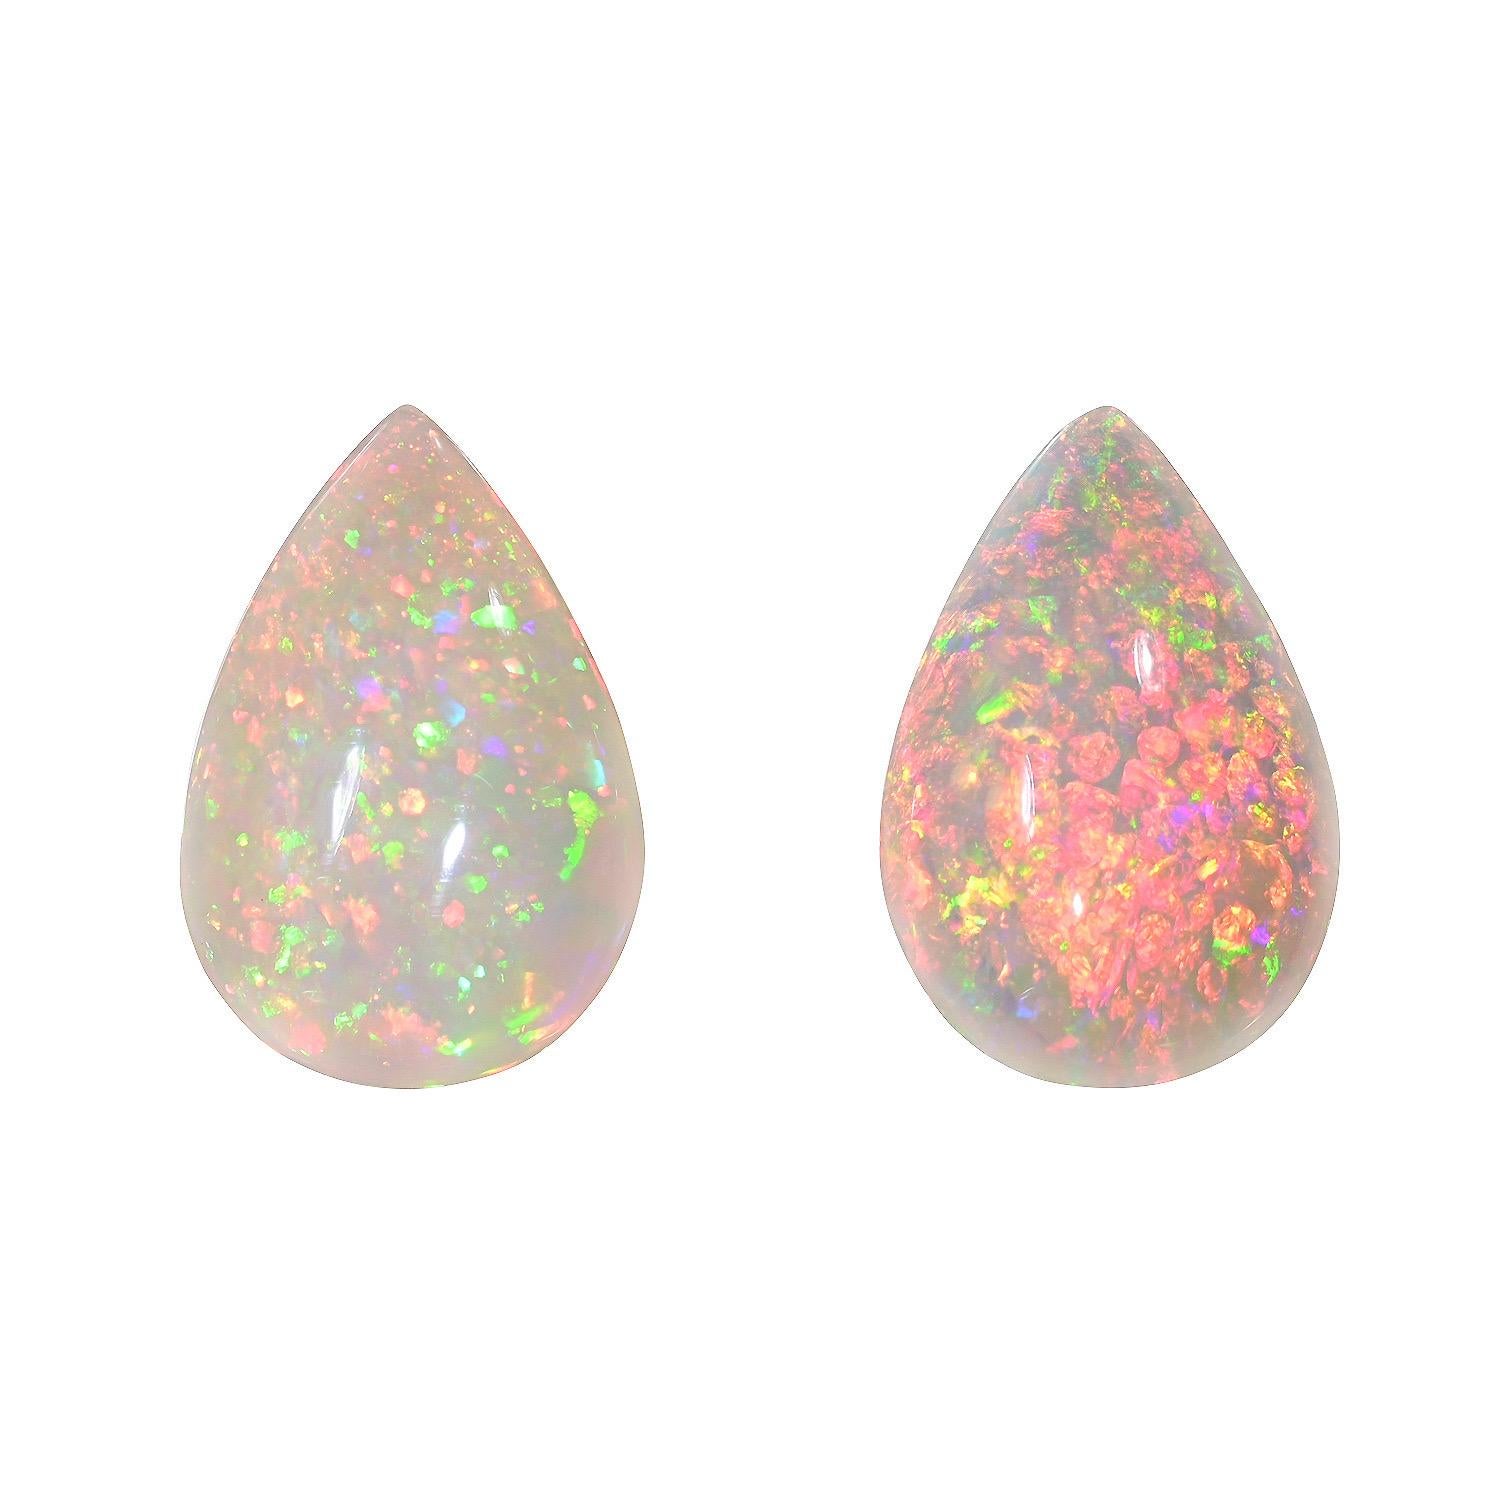 Contemporary Opal Earrings Loose Gemstone Pair 12.34 Carat Natural Ethiopian Pear Shapes For Sale